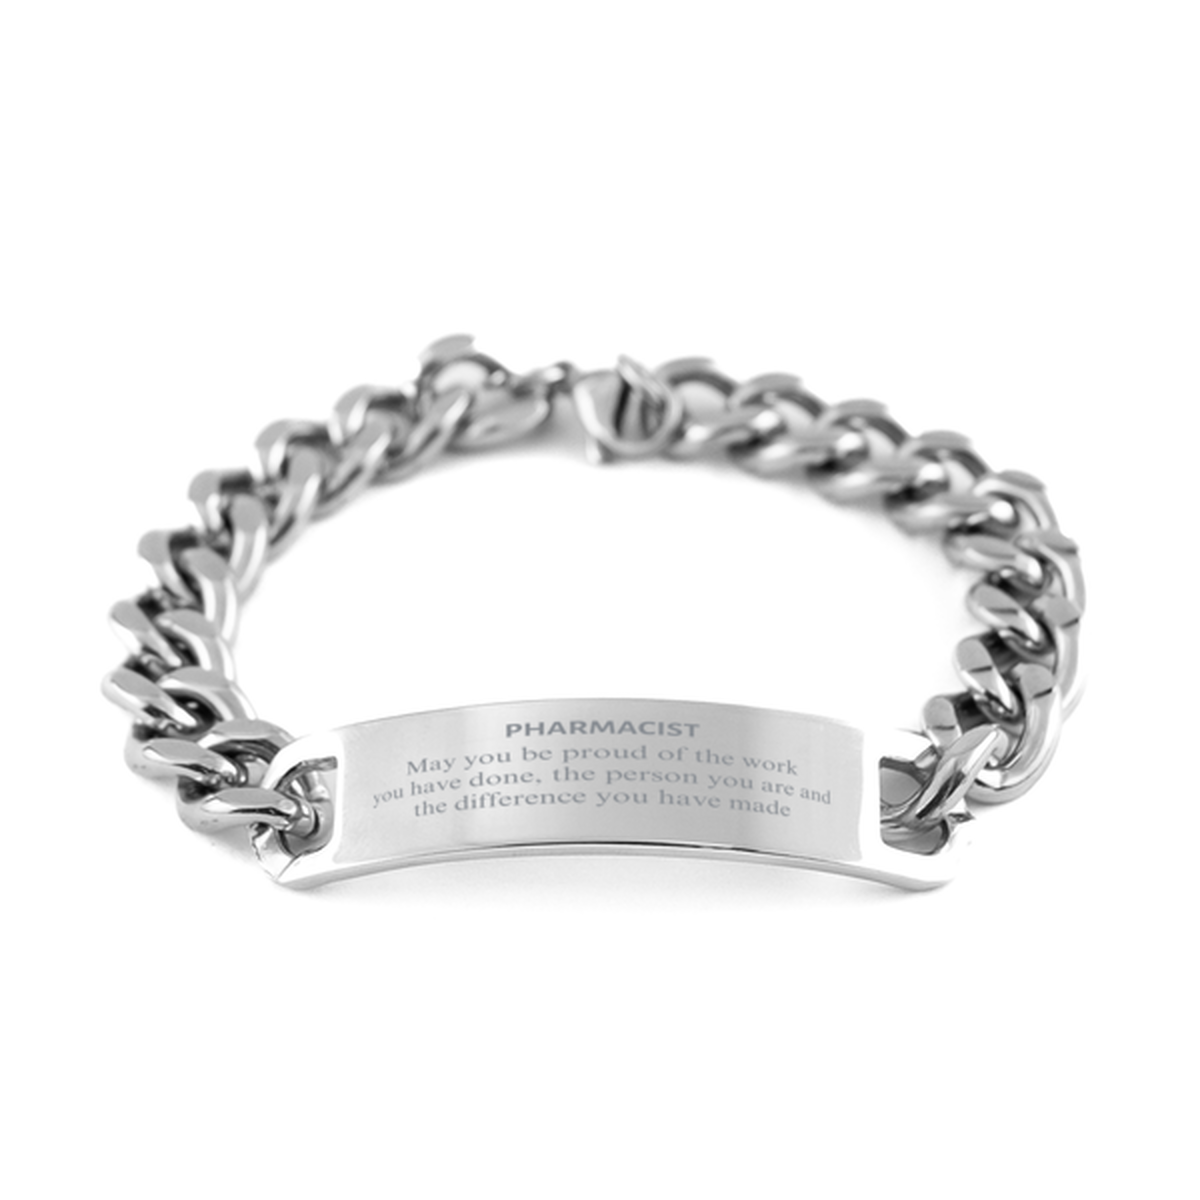 Pharmacist May you be proud of the work you have done, Retirement Pharmacist Cuban Chain Stainless Steel Bracelet for Colleague Appreciation Gifts Amazing for Pharmacist